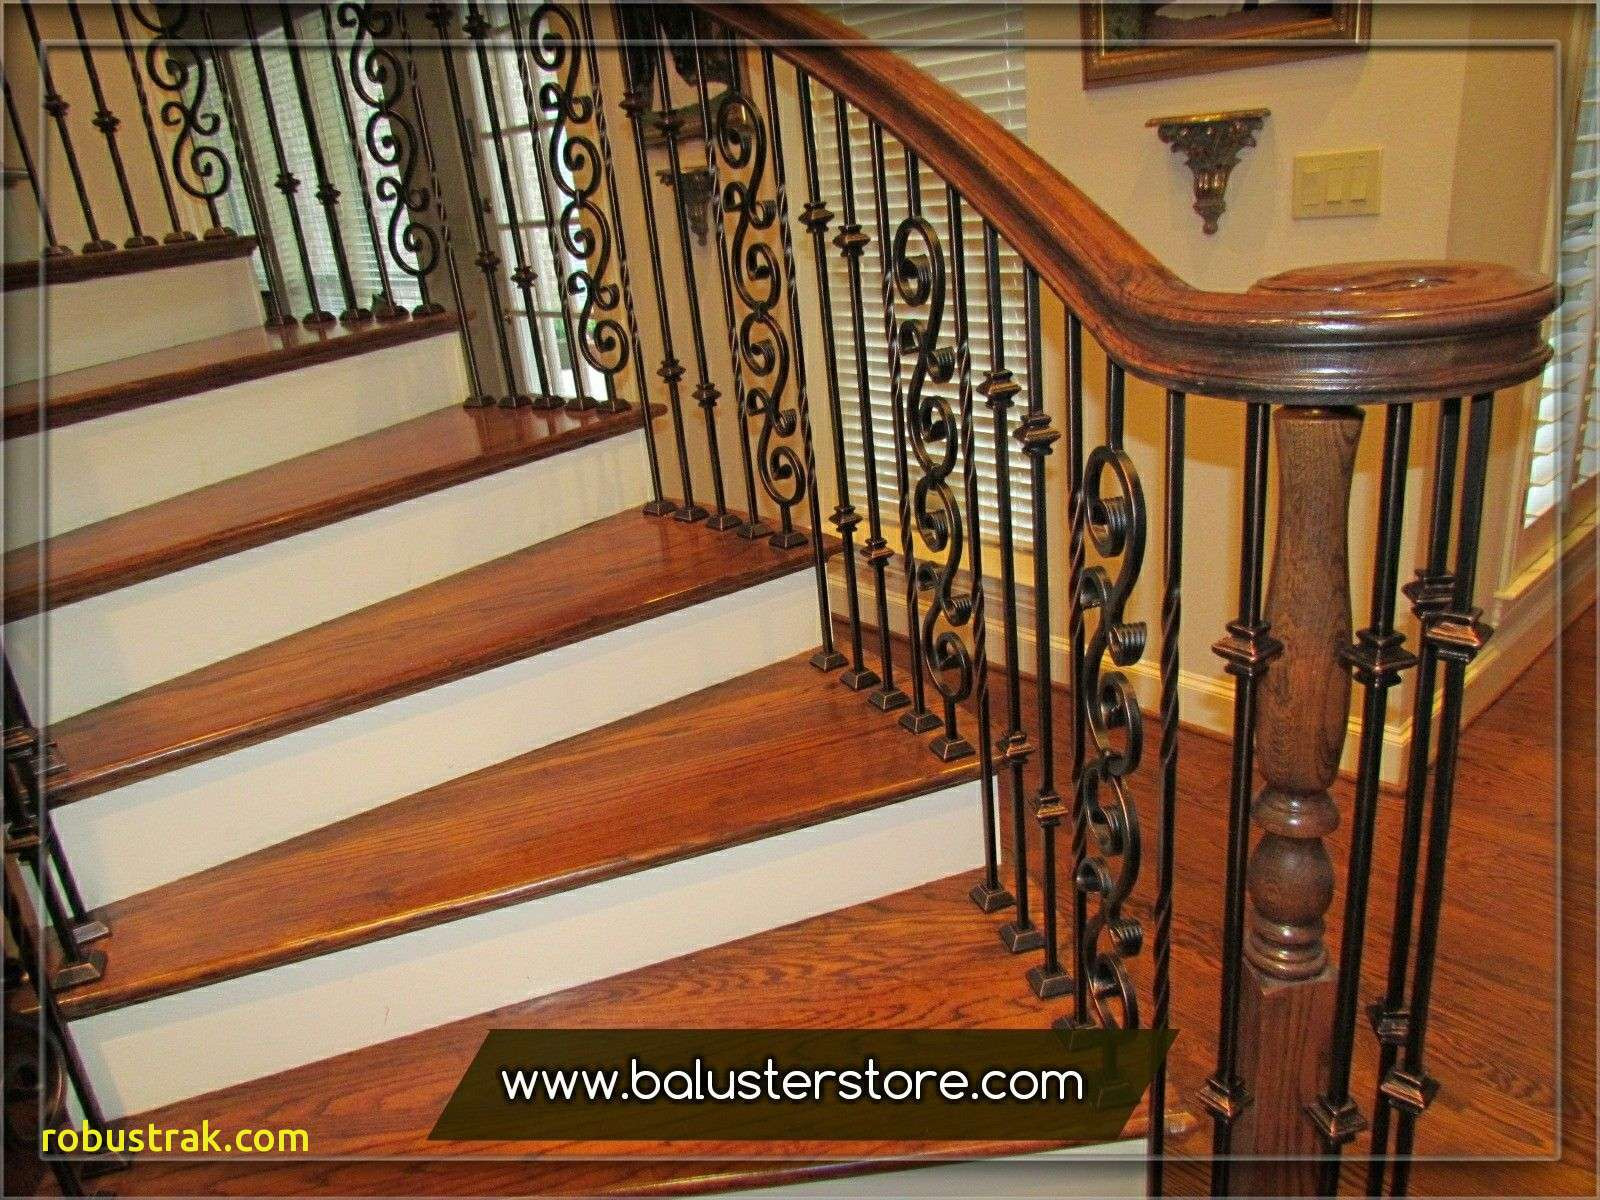 hardwood floor stairs images of inspirational stair railing ideas home design ideas with iron stair balusters parts iron handrails interior stair iron balusters wrought iron stair railings kits wrought